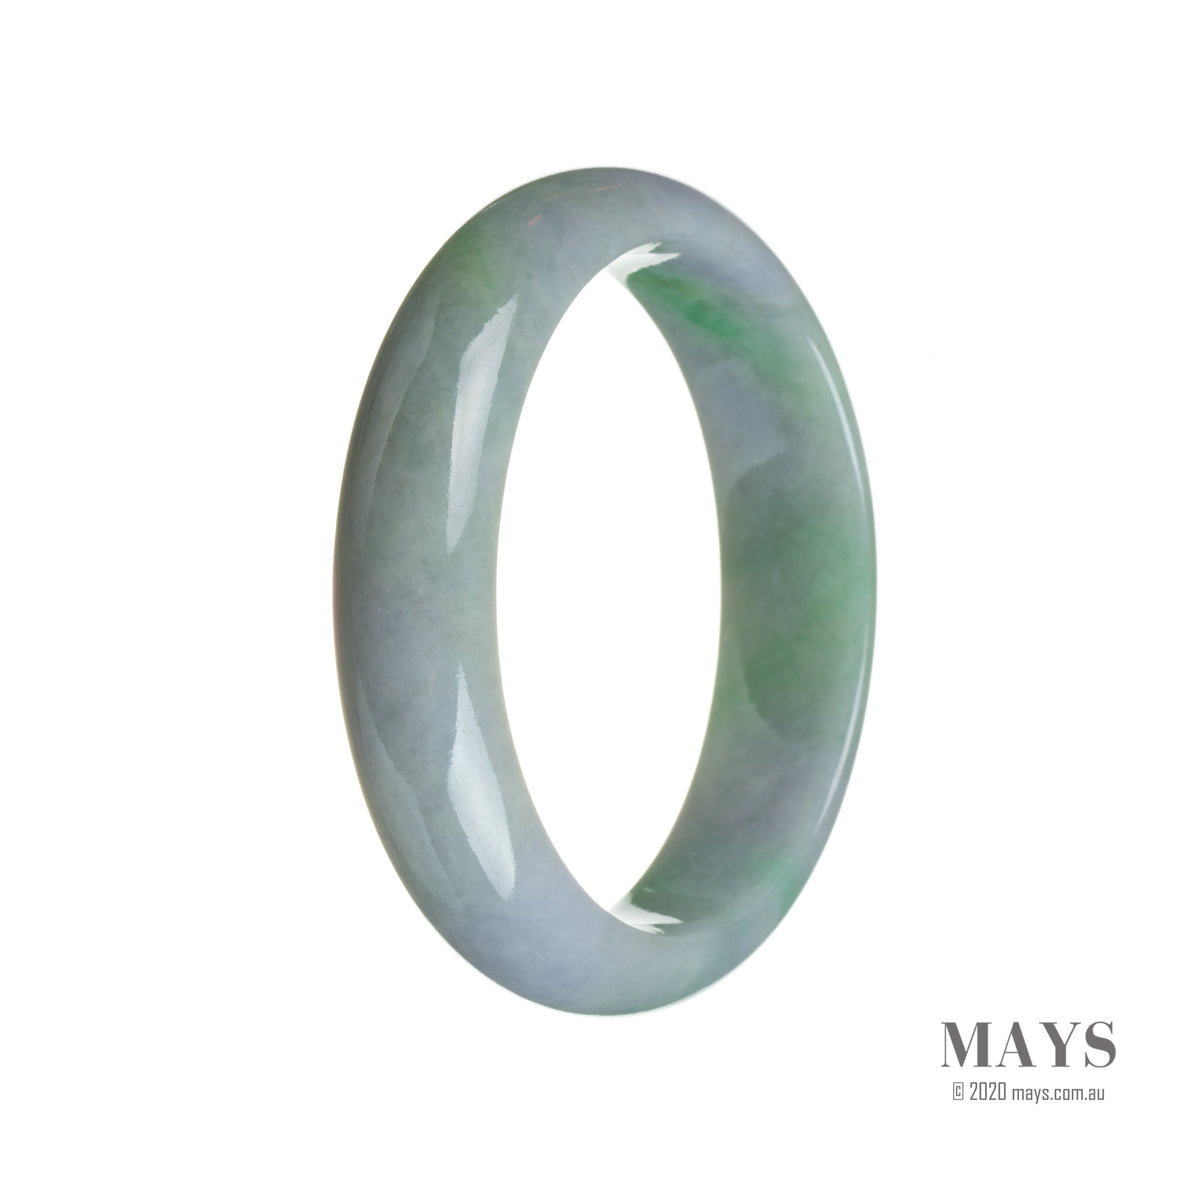 A half moon-shaped traditional jade bangle in a genuine natural bluish lavender color with hints of green.